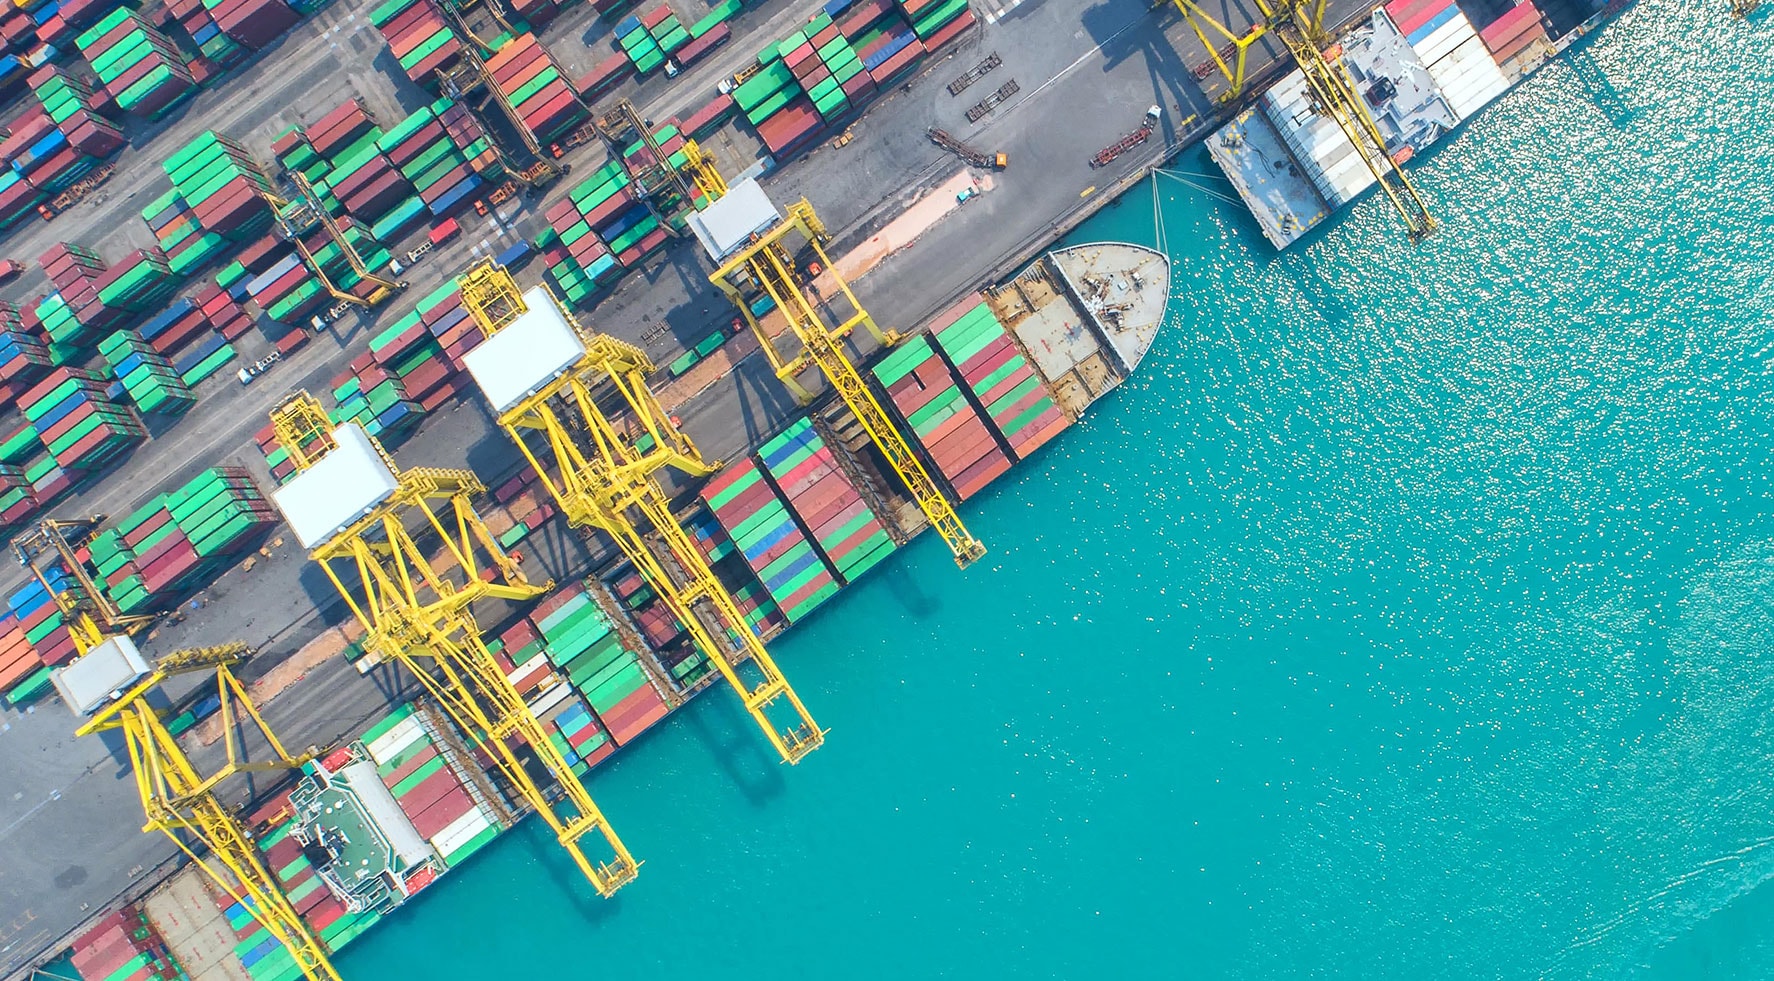 Birdseye view of a shipping port